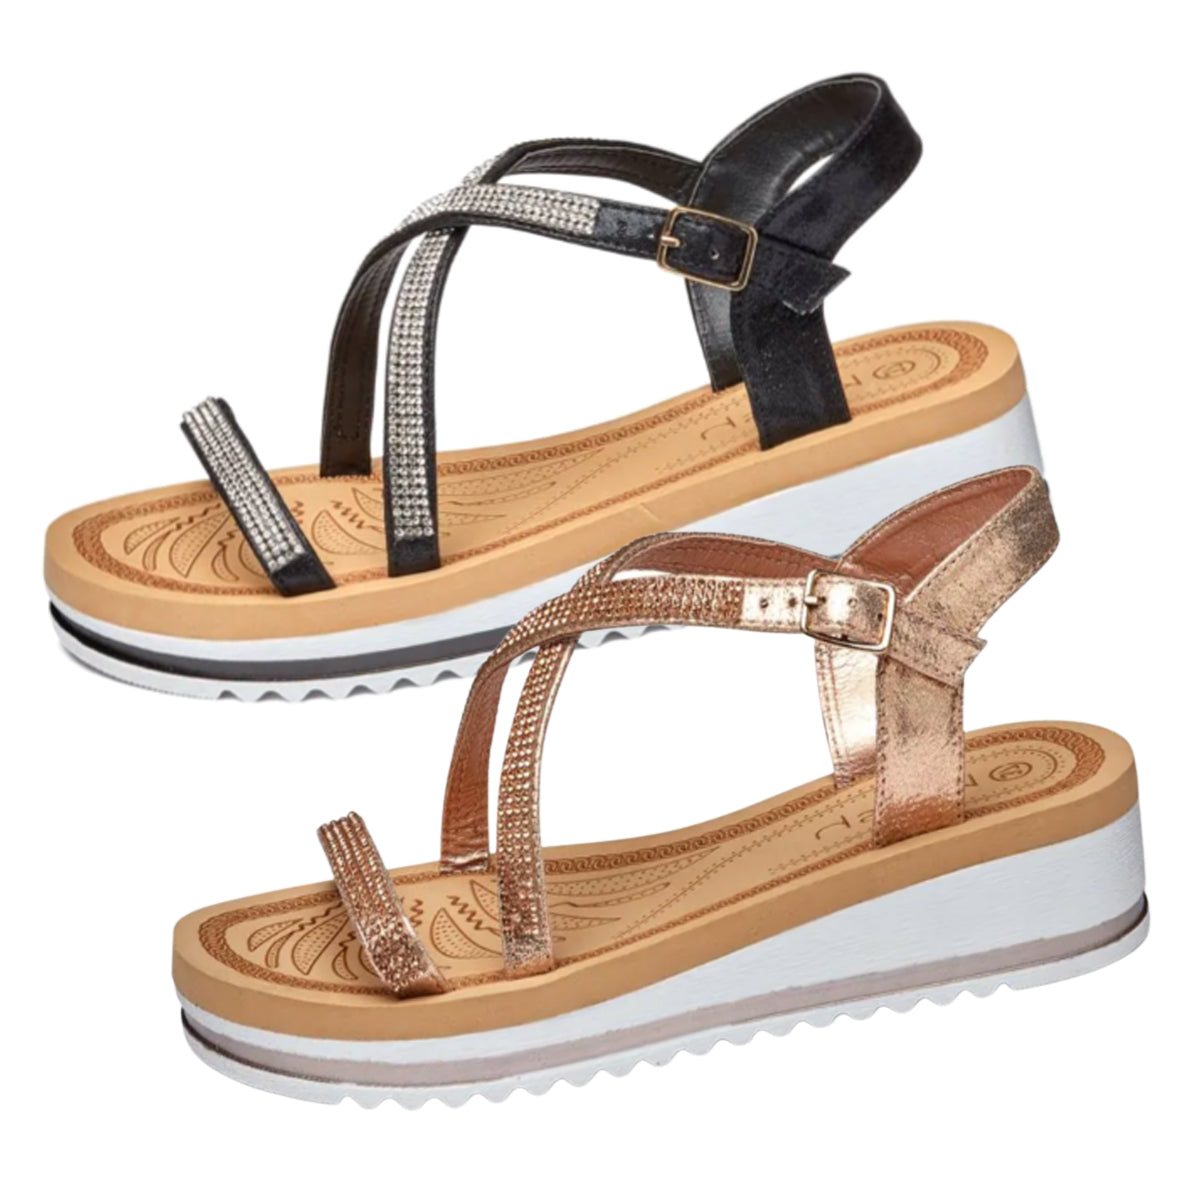 Low Wedge Sparkly Cross Strap summer sandals